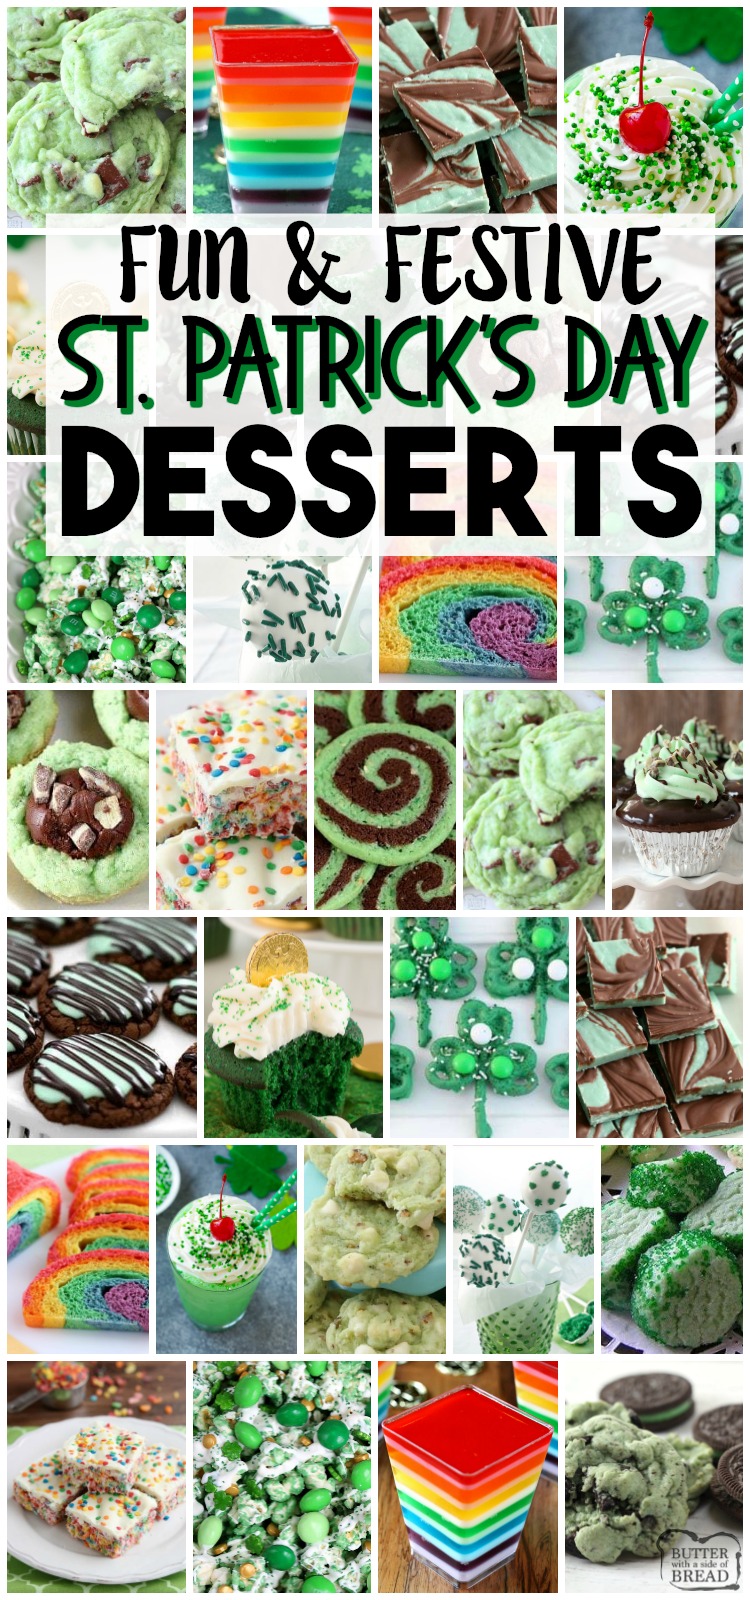 Fun & Festive St. Patrick's Day Food recipes from cookies to jello!  Collection of EASY St. Patrick's Day recipes for everyone!  #StPatricksDay #green #rainbow #food #recipes from BUTTER WITH A SIDE OF BREAD